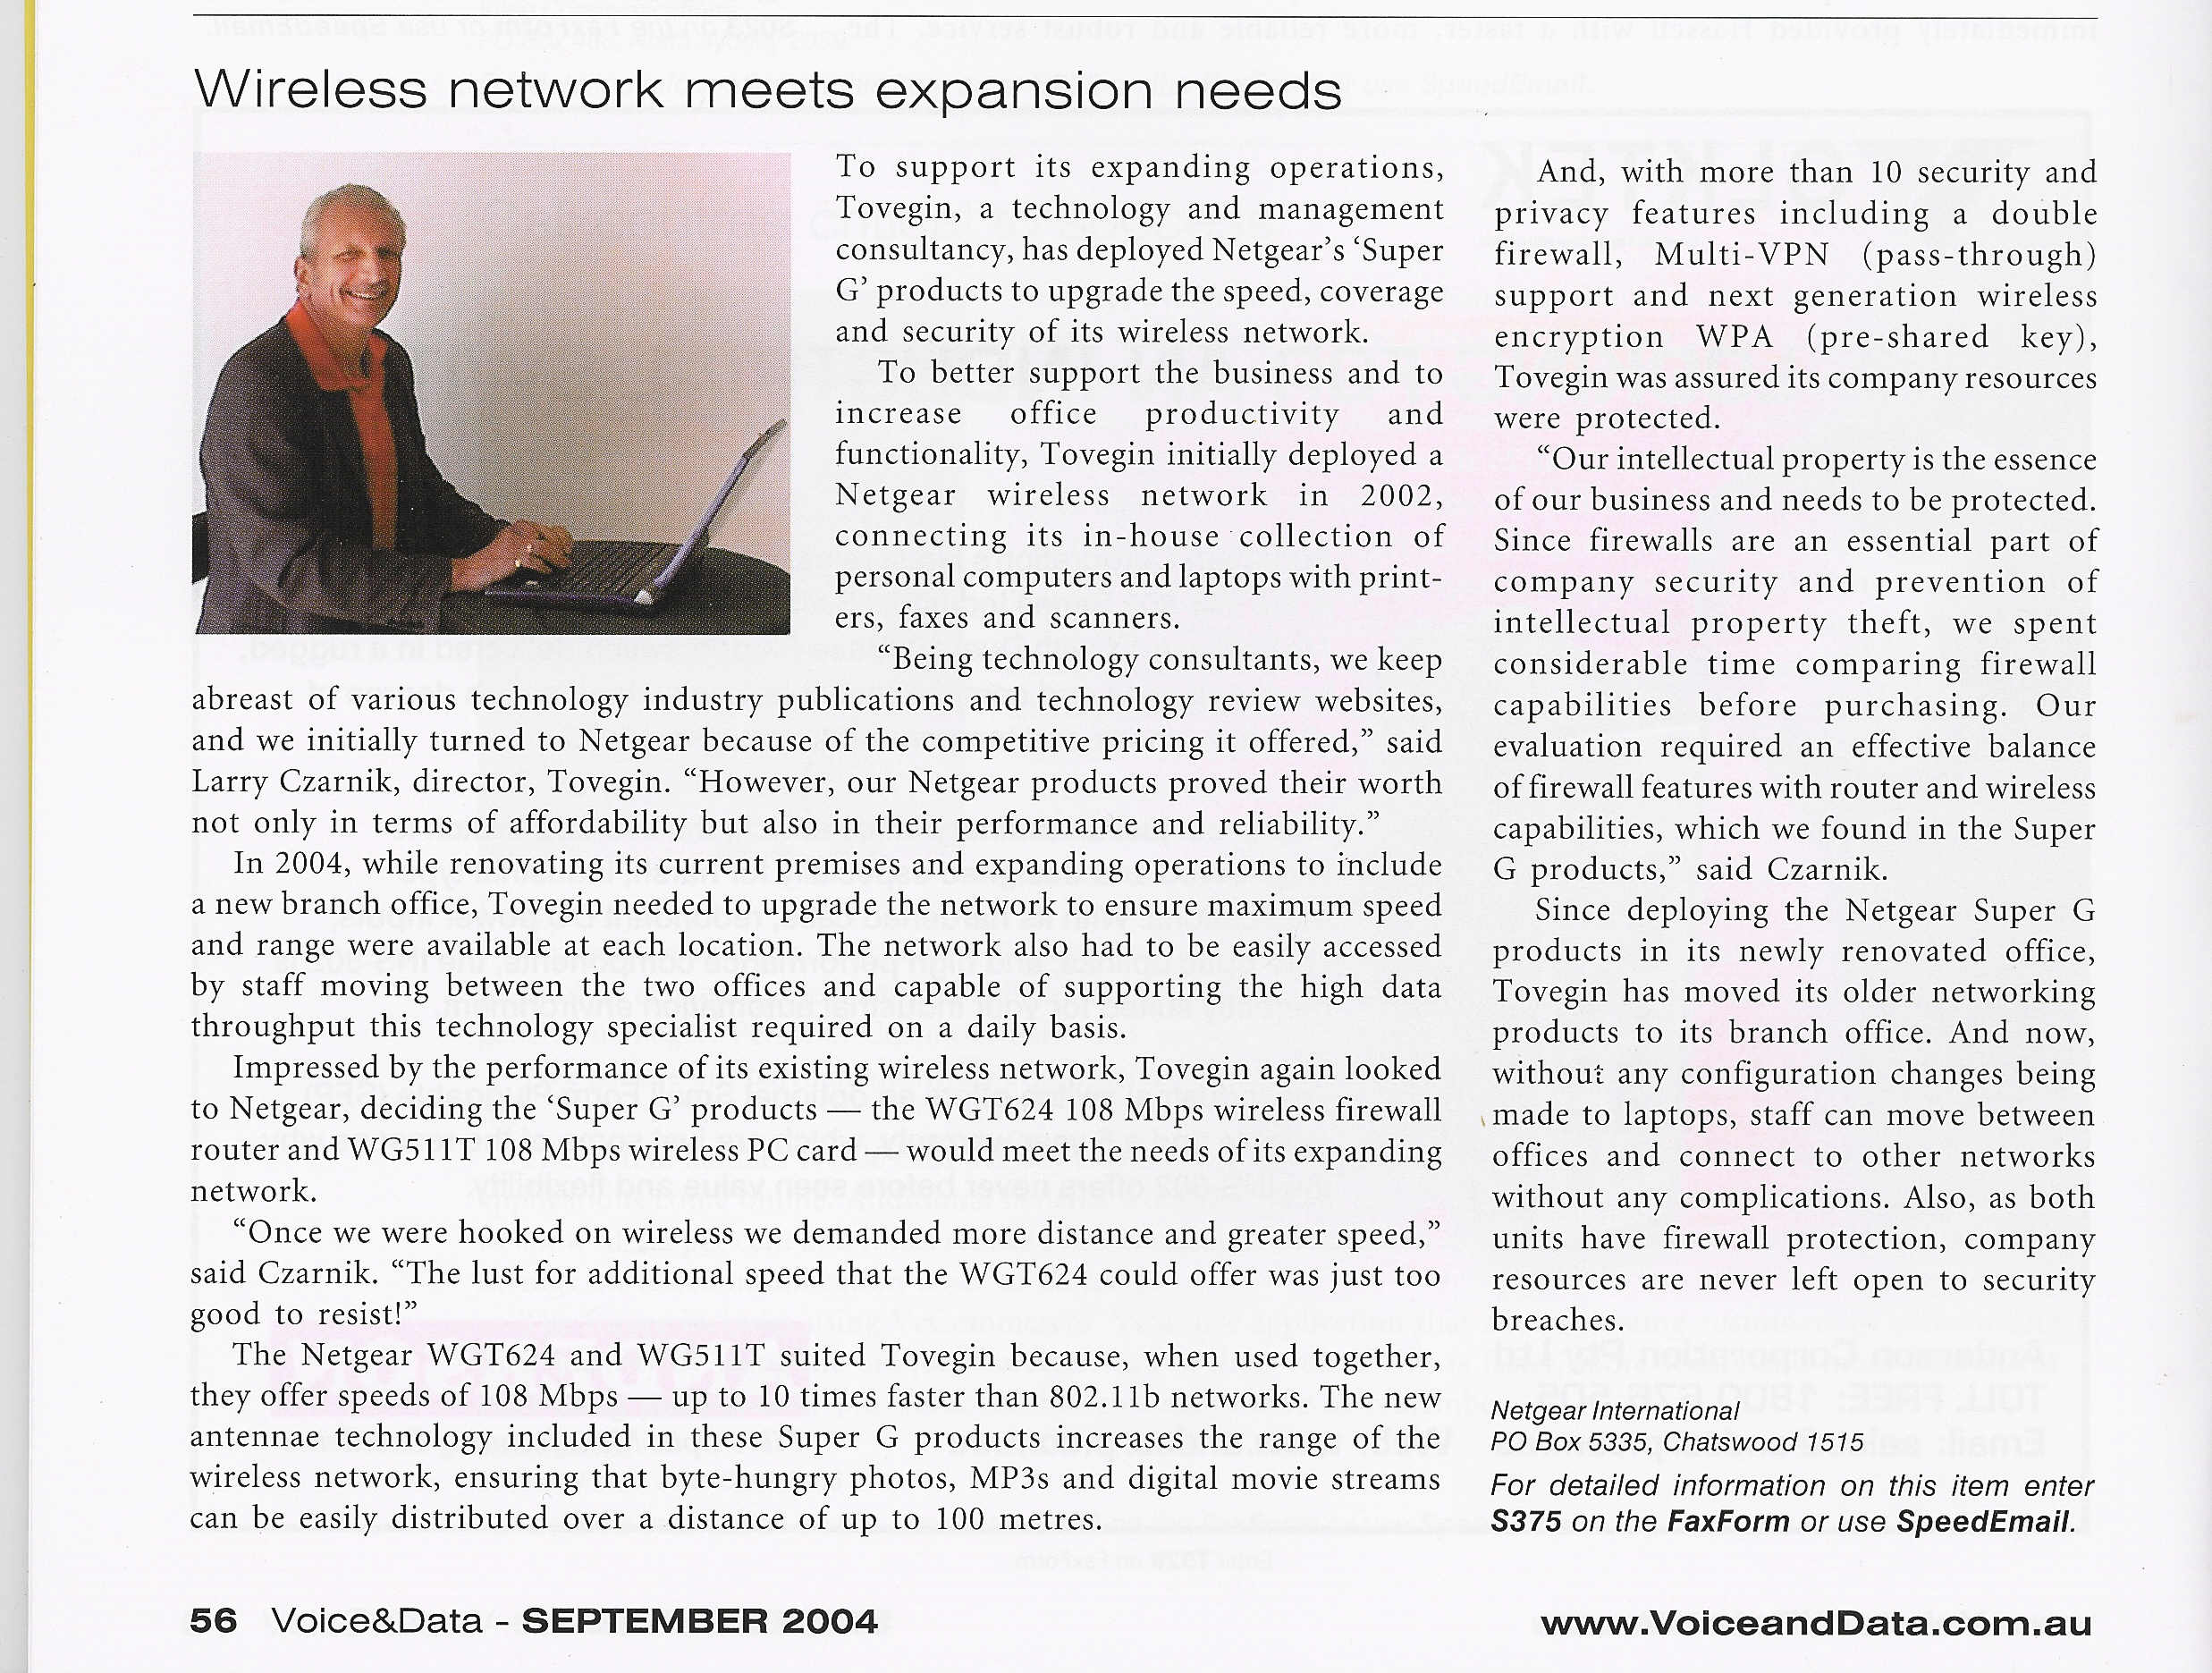 Tovegin appears in Wireless network meets expansion needs